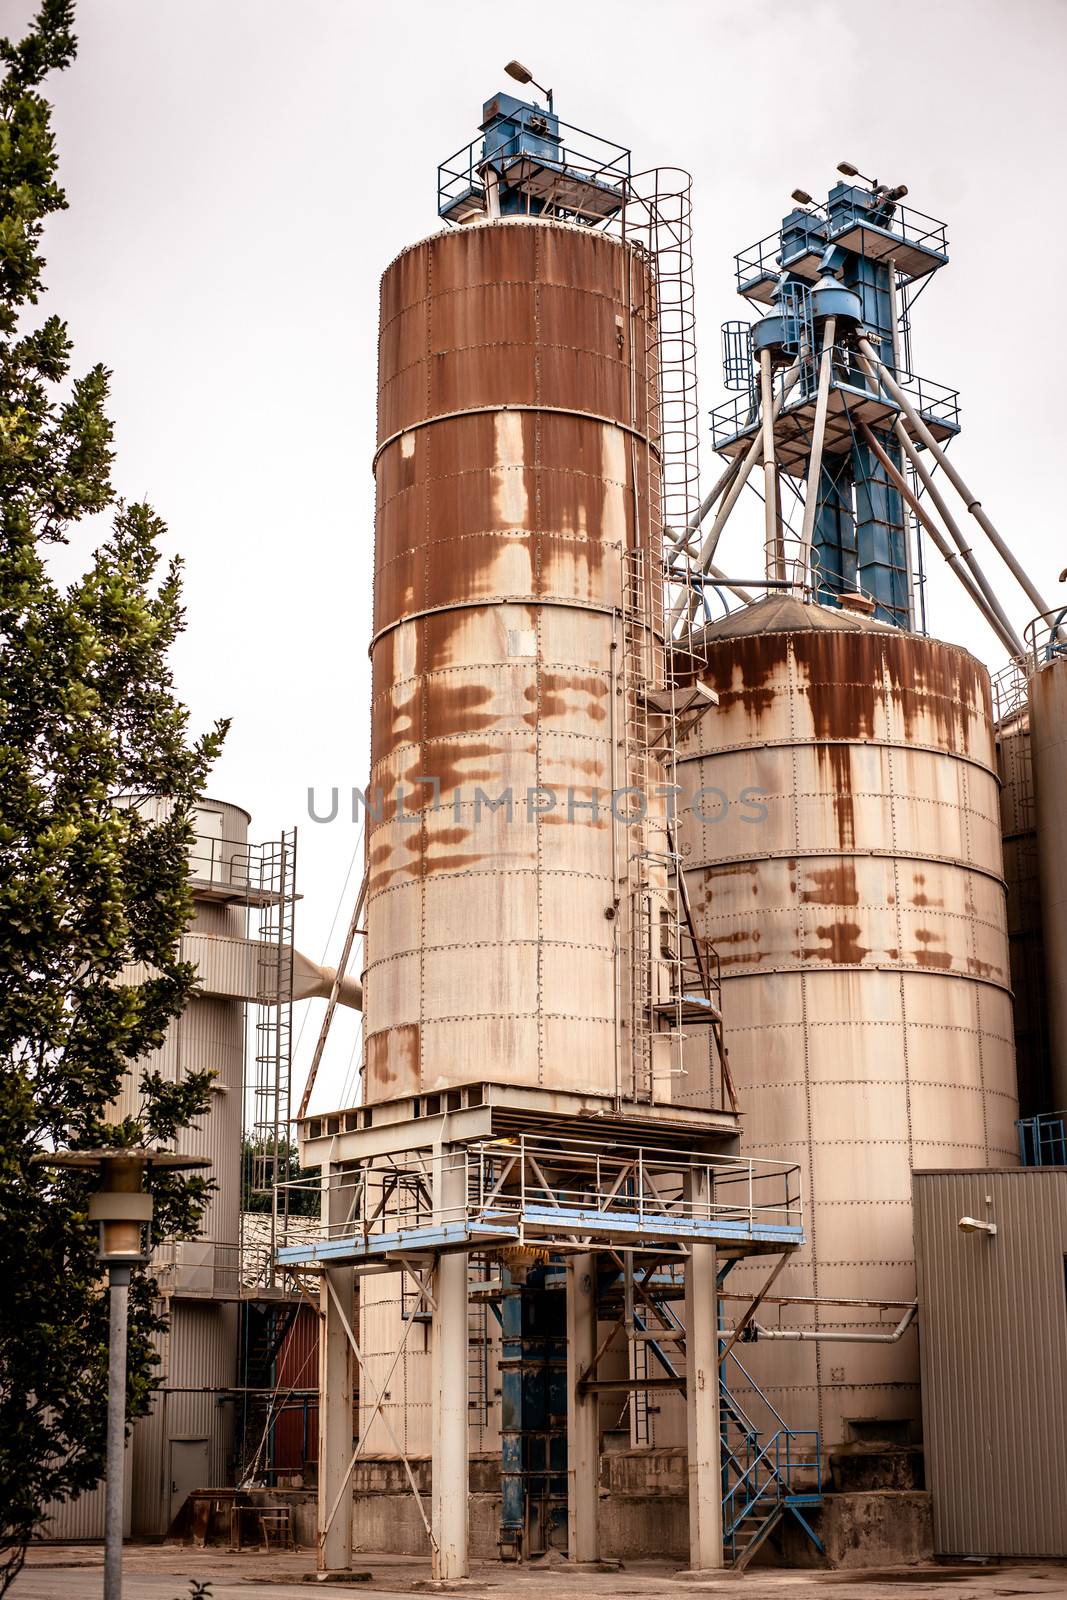 Industrial silo by Sportactive